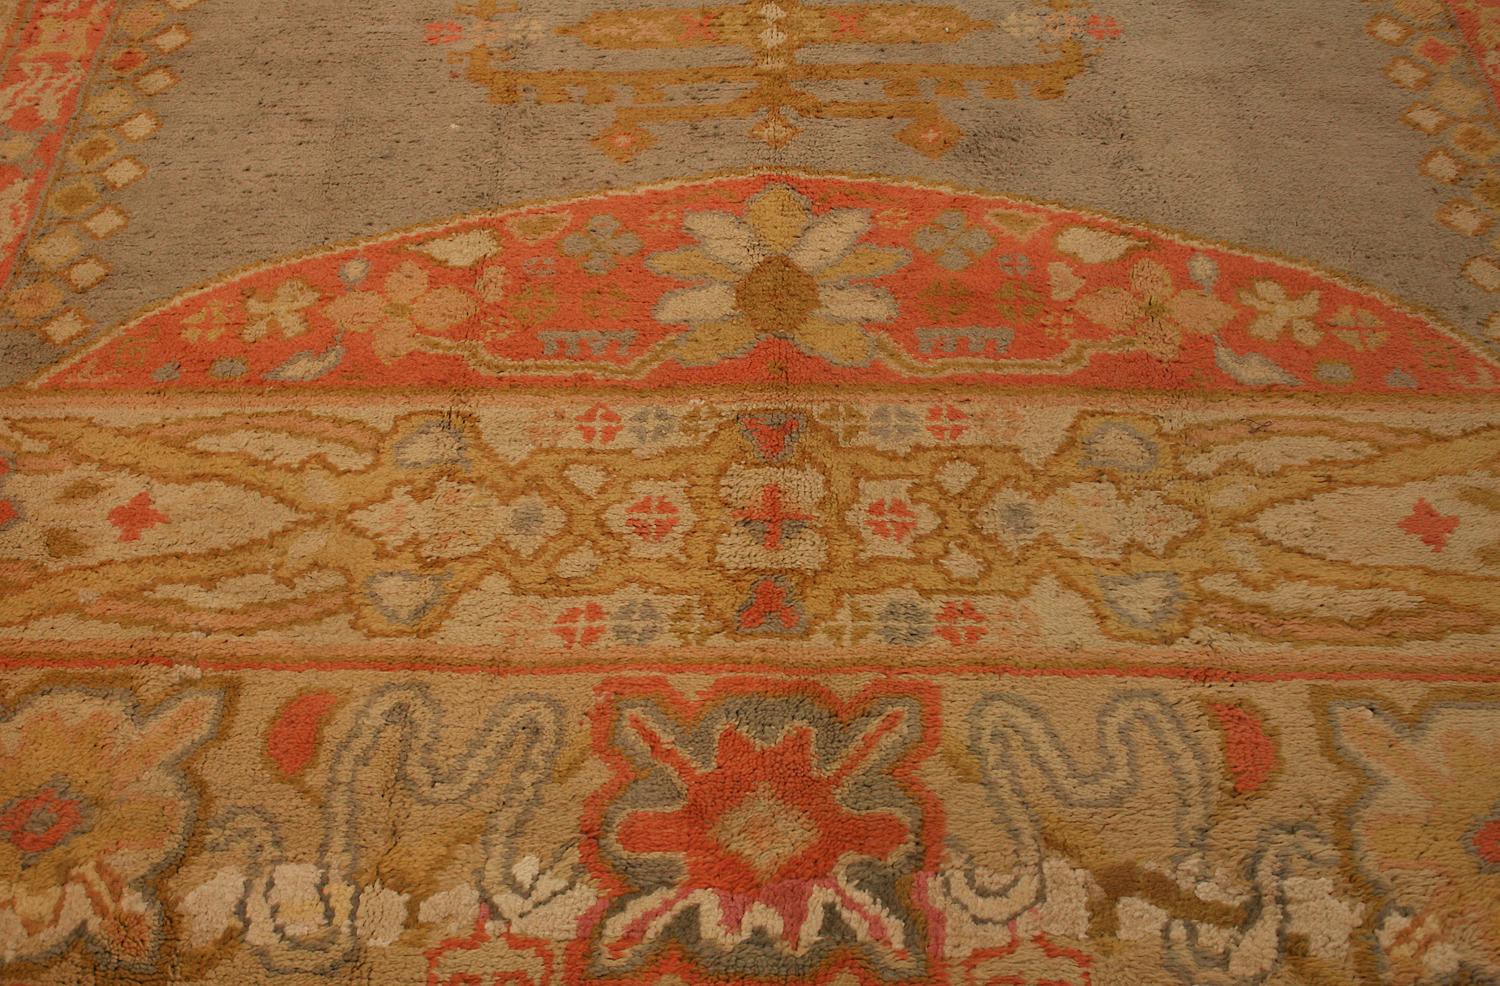 This is an extra-large antique Izmir carpet woven in Turkey during the first quarter of the 20th century circa 1920's and measures 565 x 360CM in size. This carpet has an open field design with semi-circle motifs located at each end of the field.